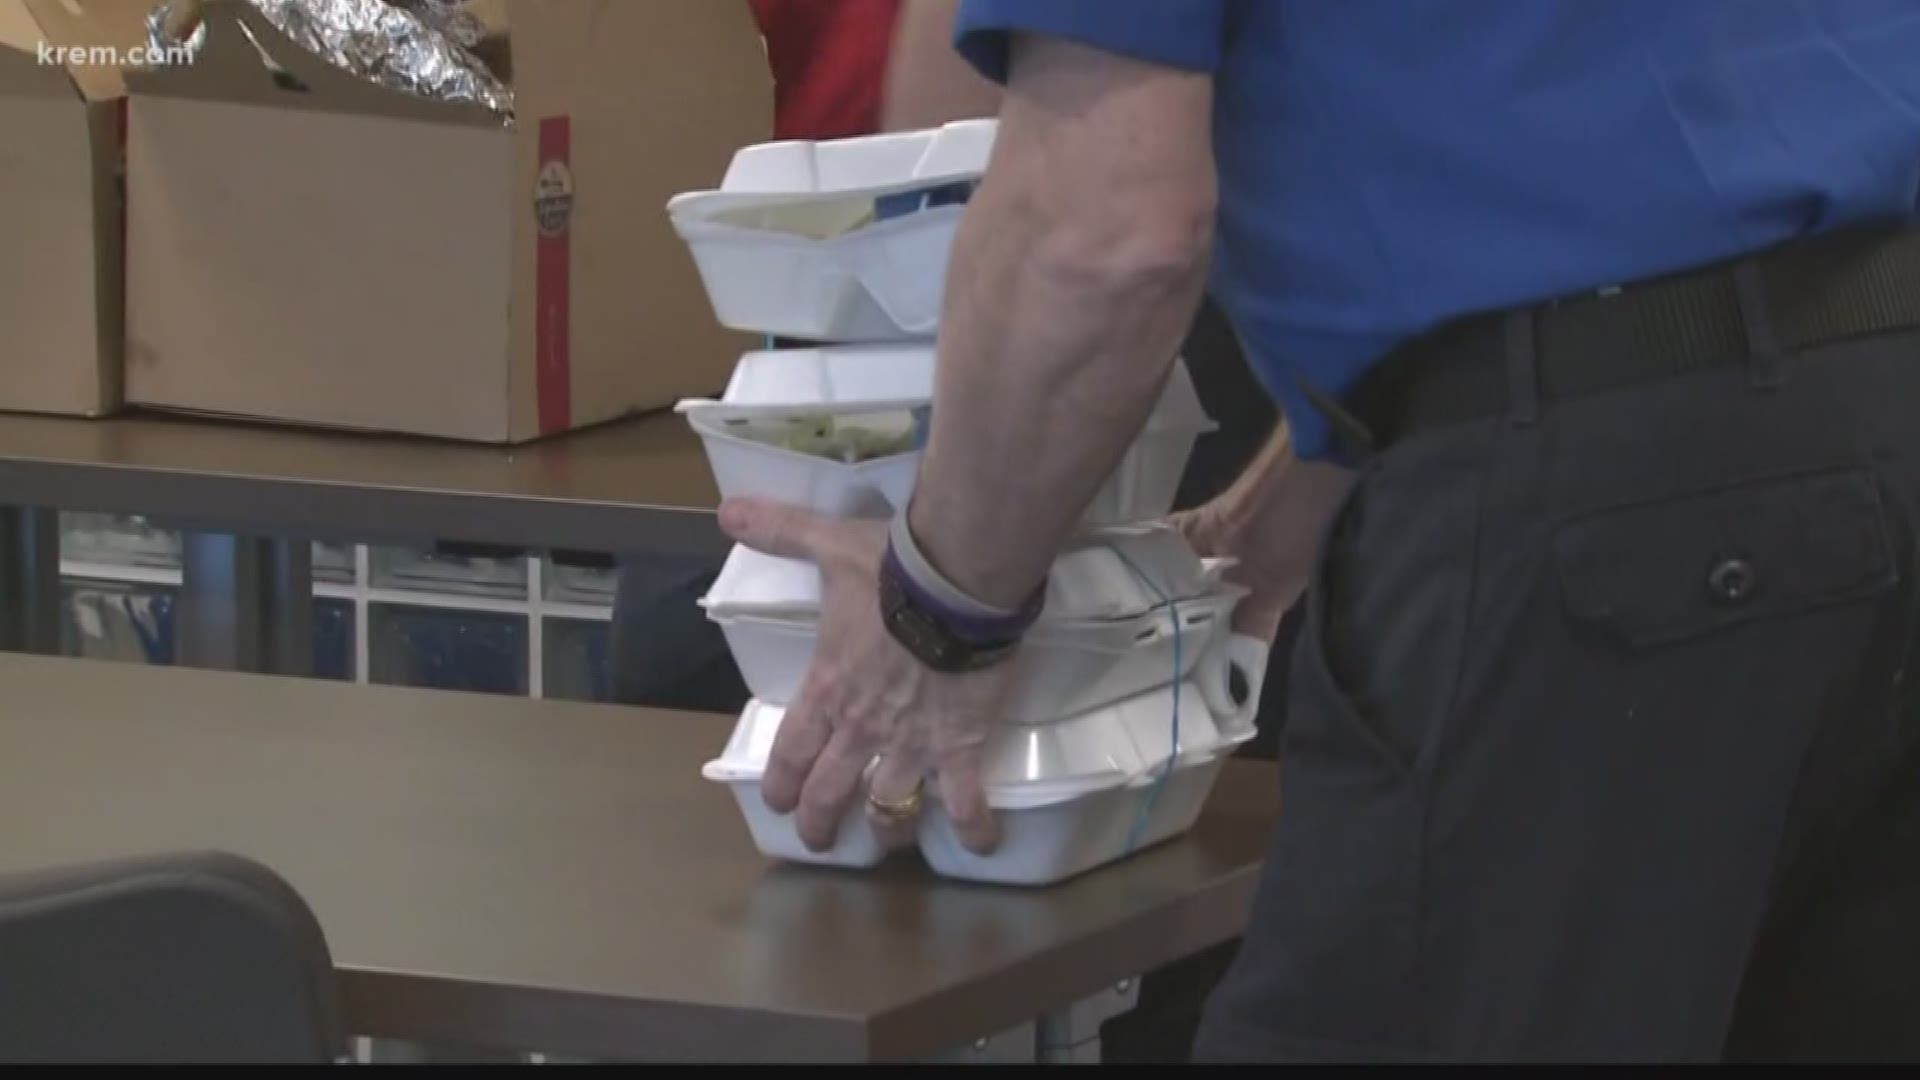 KREM 2 Reporter Amanda Roley went to the Spokane International Airport to learn about how different unions are providing free lunches for TSA agents working without pay.